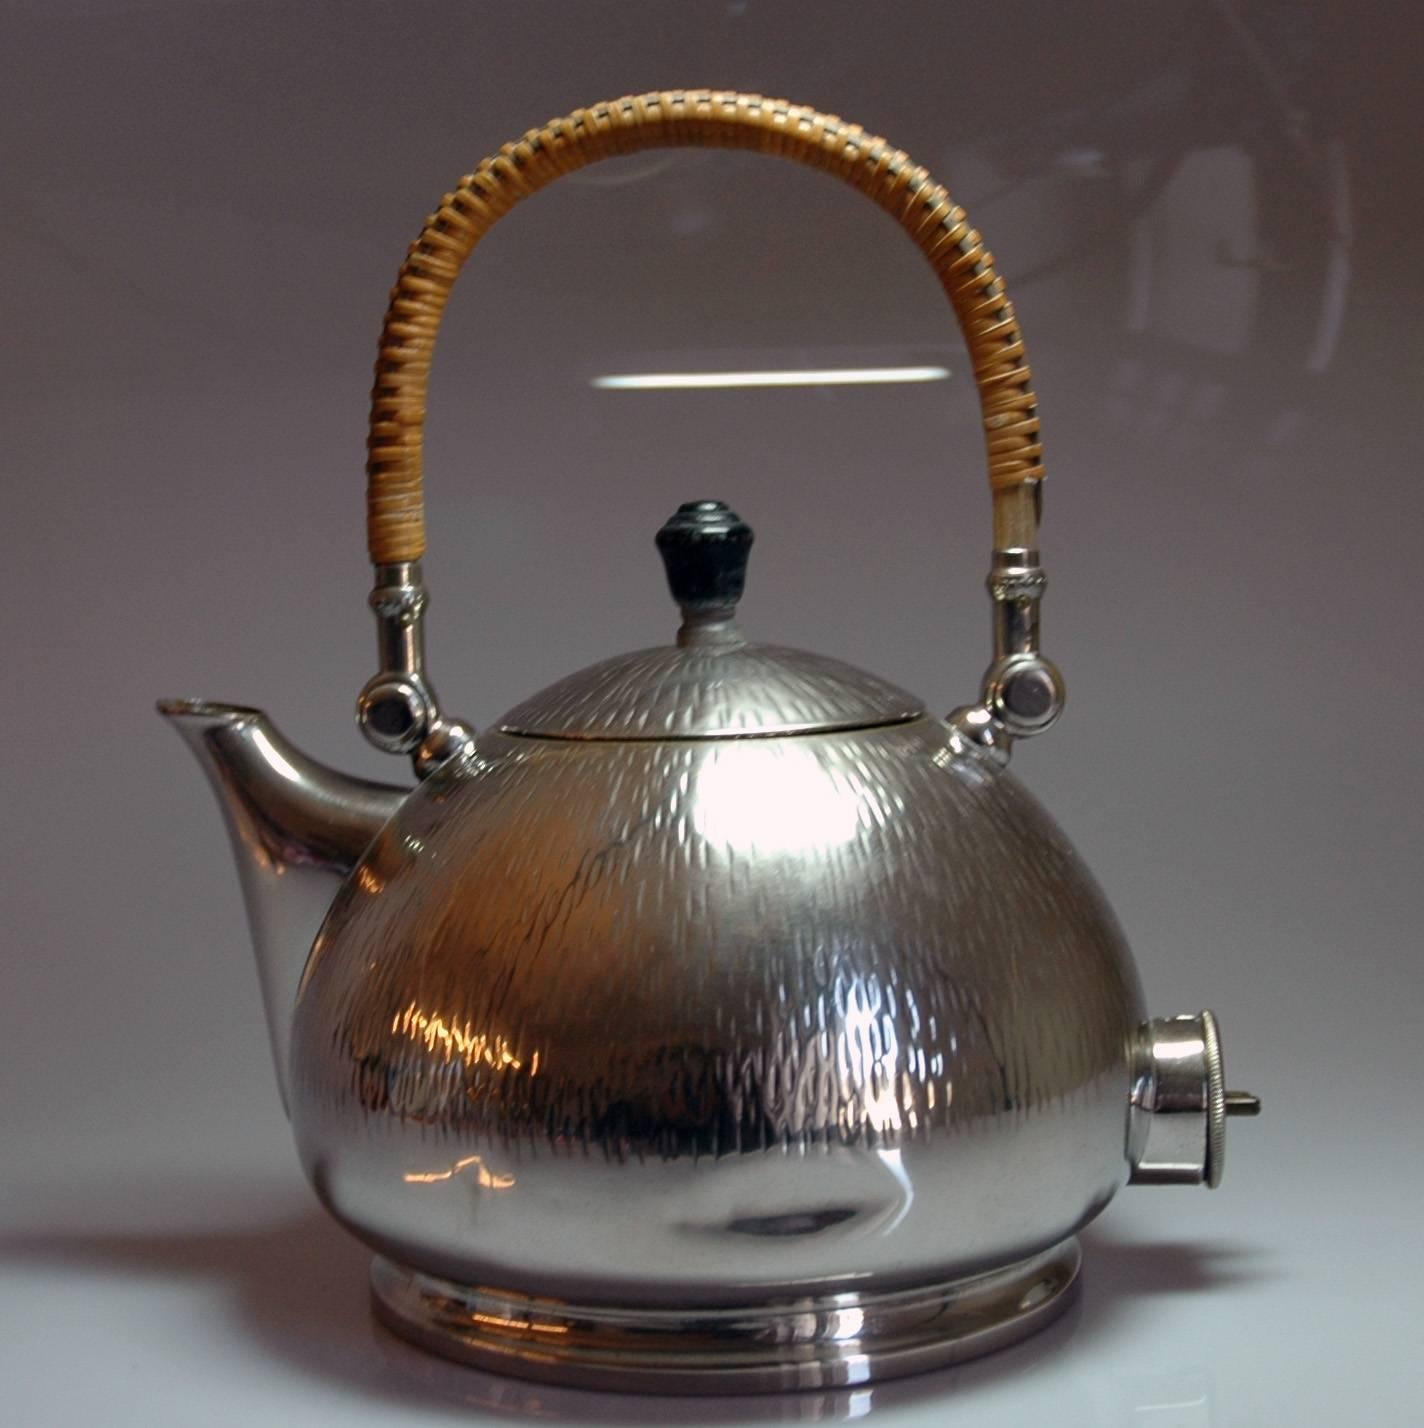 This electrical tea kettle of Peter Behrens is an important sample for the beginning of early Industrial Design. Peter Behrens established for the AEG the worlds first corporate design – from letterhead, architecture to product design.

The kettle